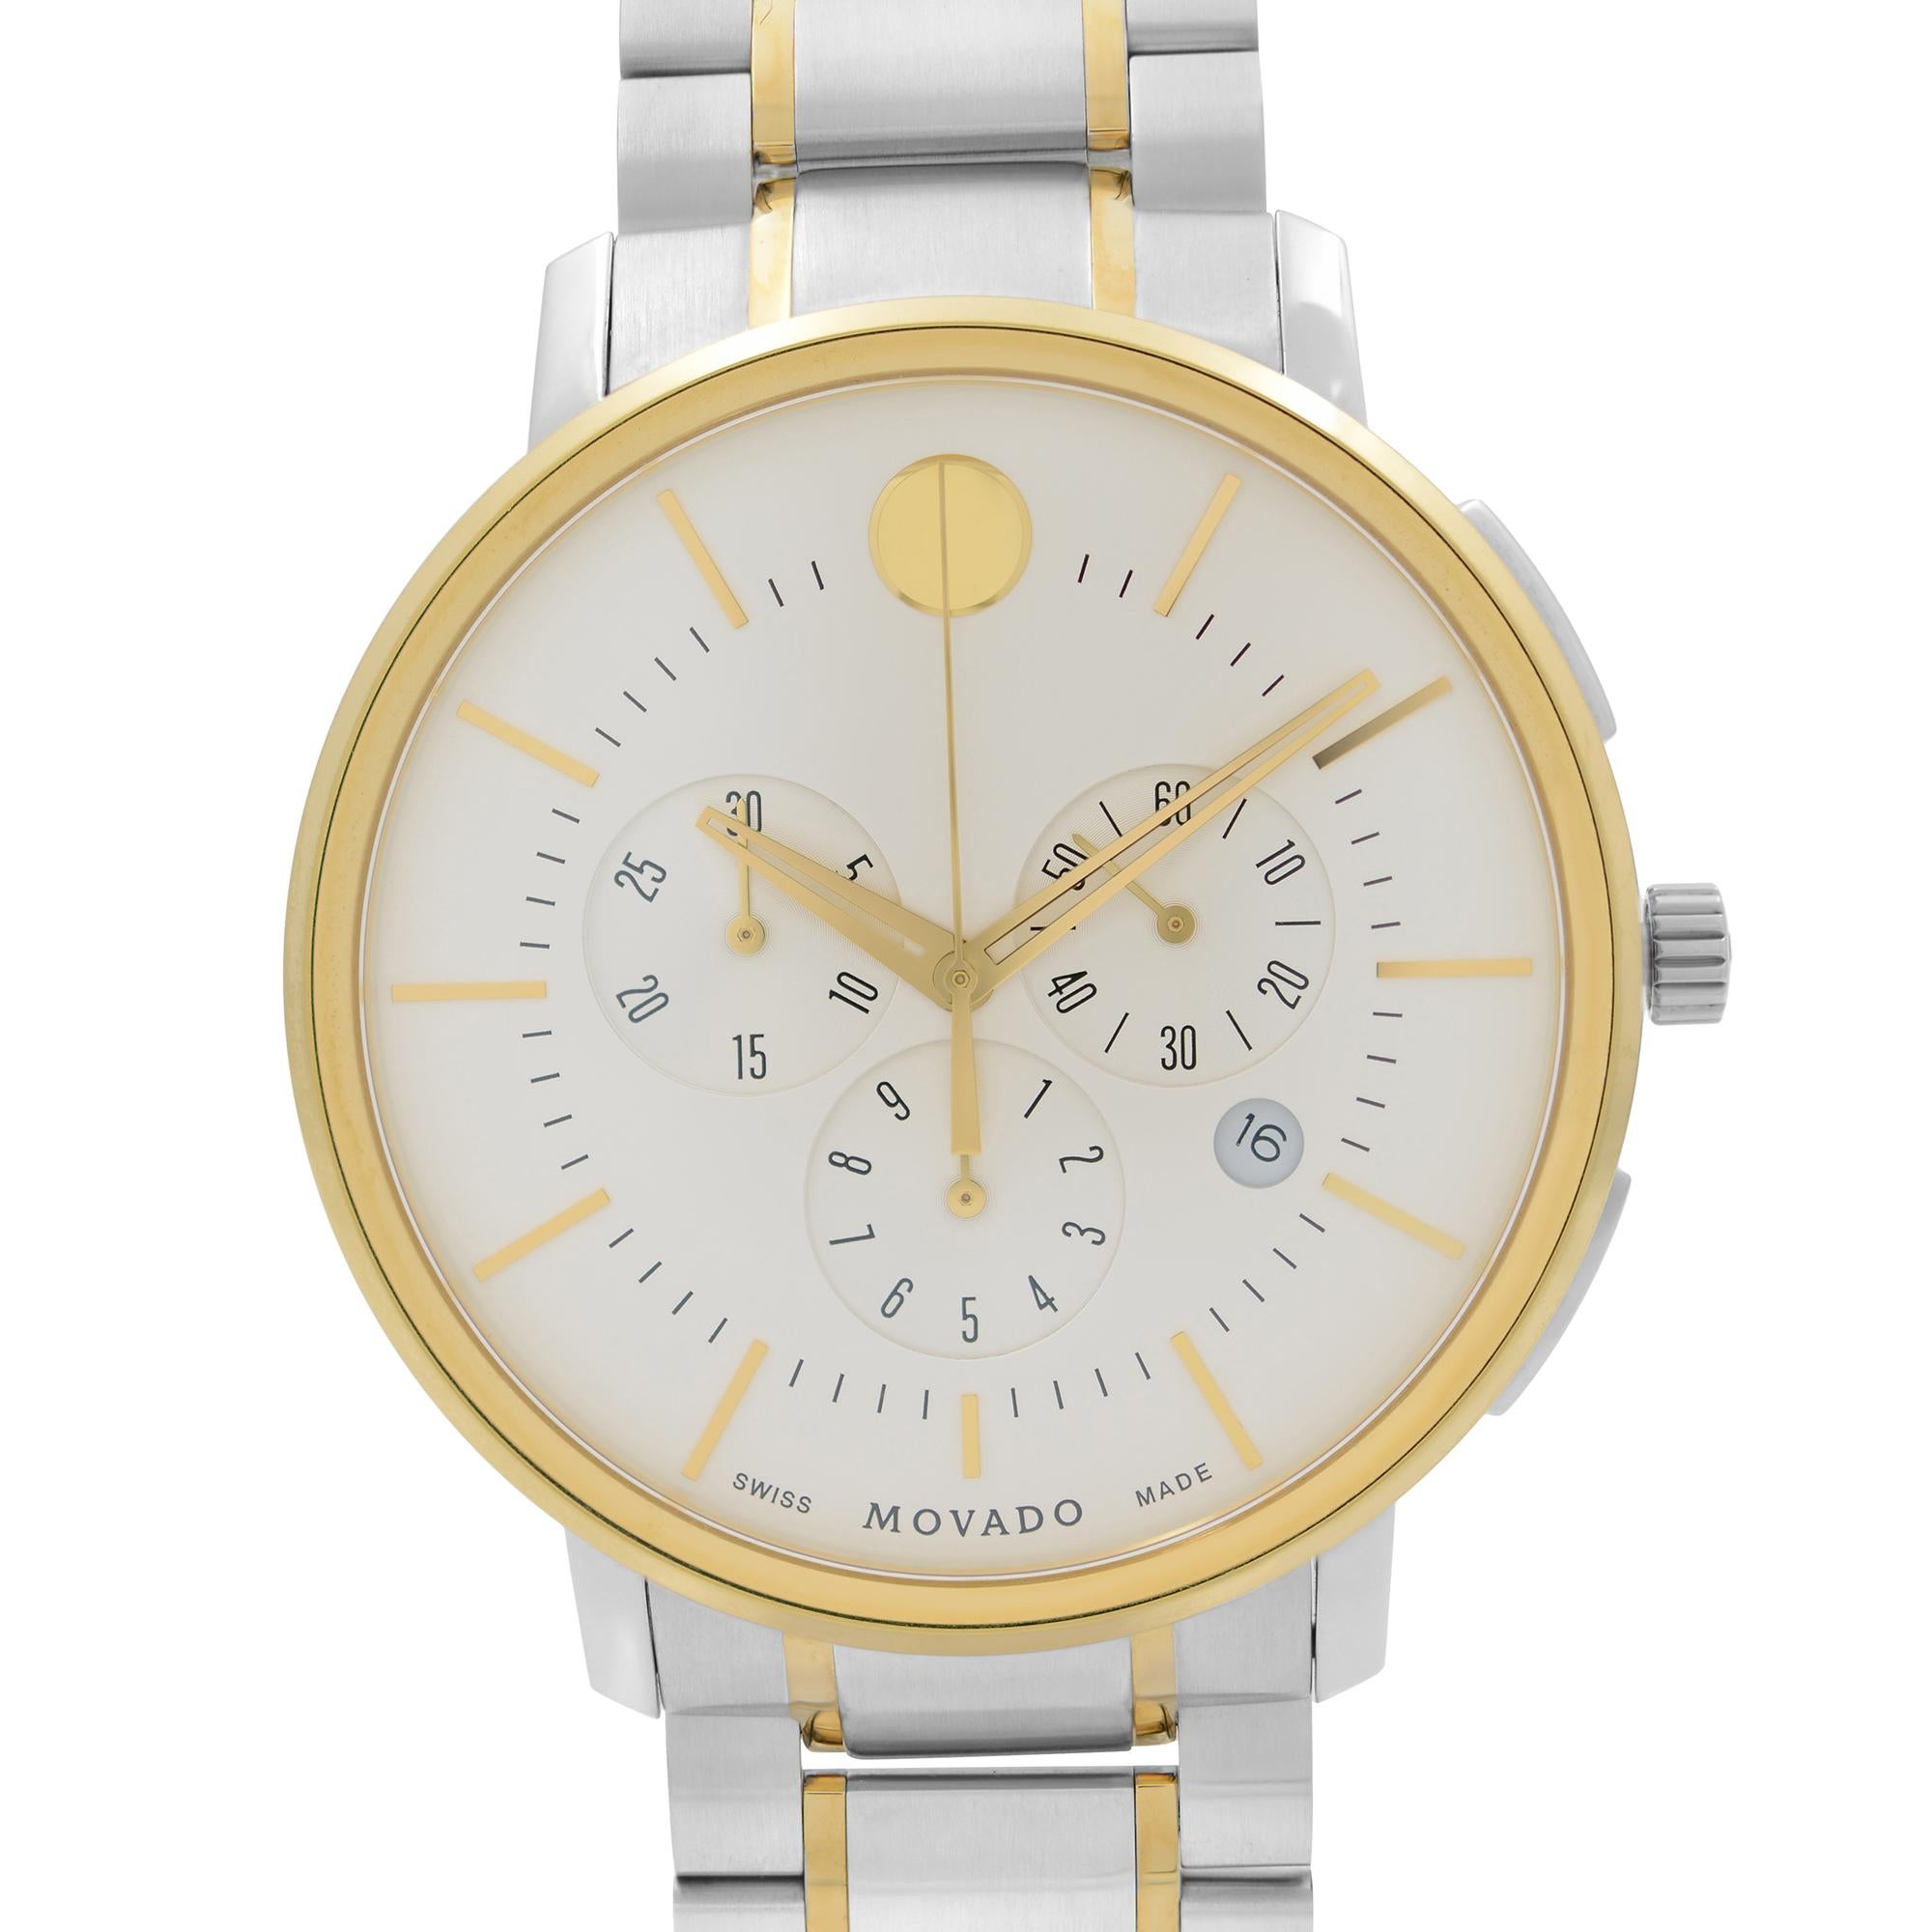 New With Defects Movado Thin Classic 42mm Two-Tone Stainless Steel Silver Dial Quartz Men's Watch 0606887. Timepiece Has Minor Dings and Scratches on the Bezel Due To Store Handling. This Beautiful Timepiece Features: Stainless Steel Case with a